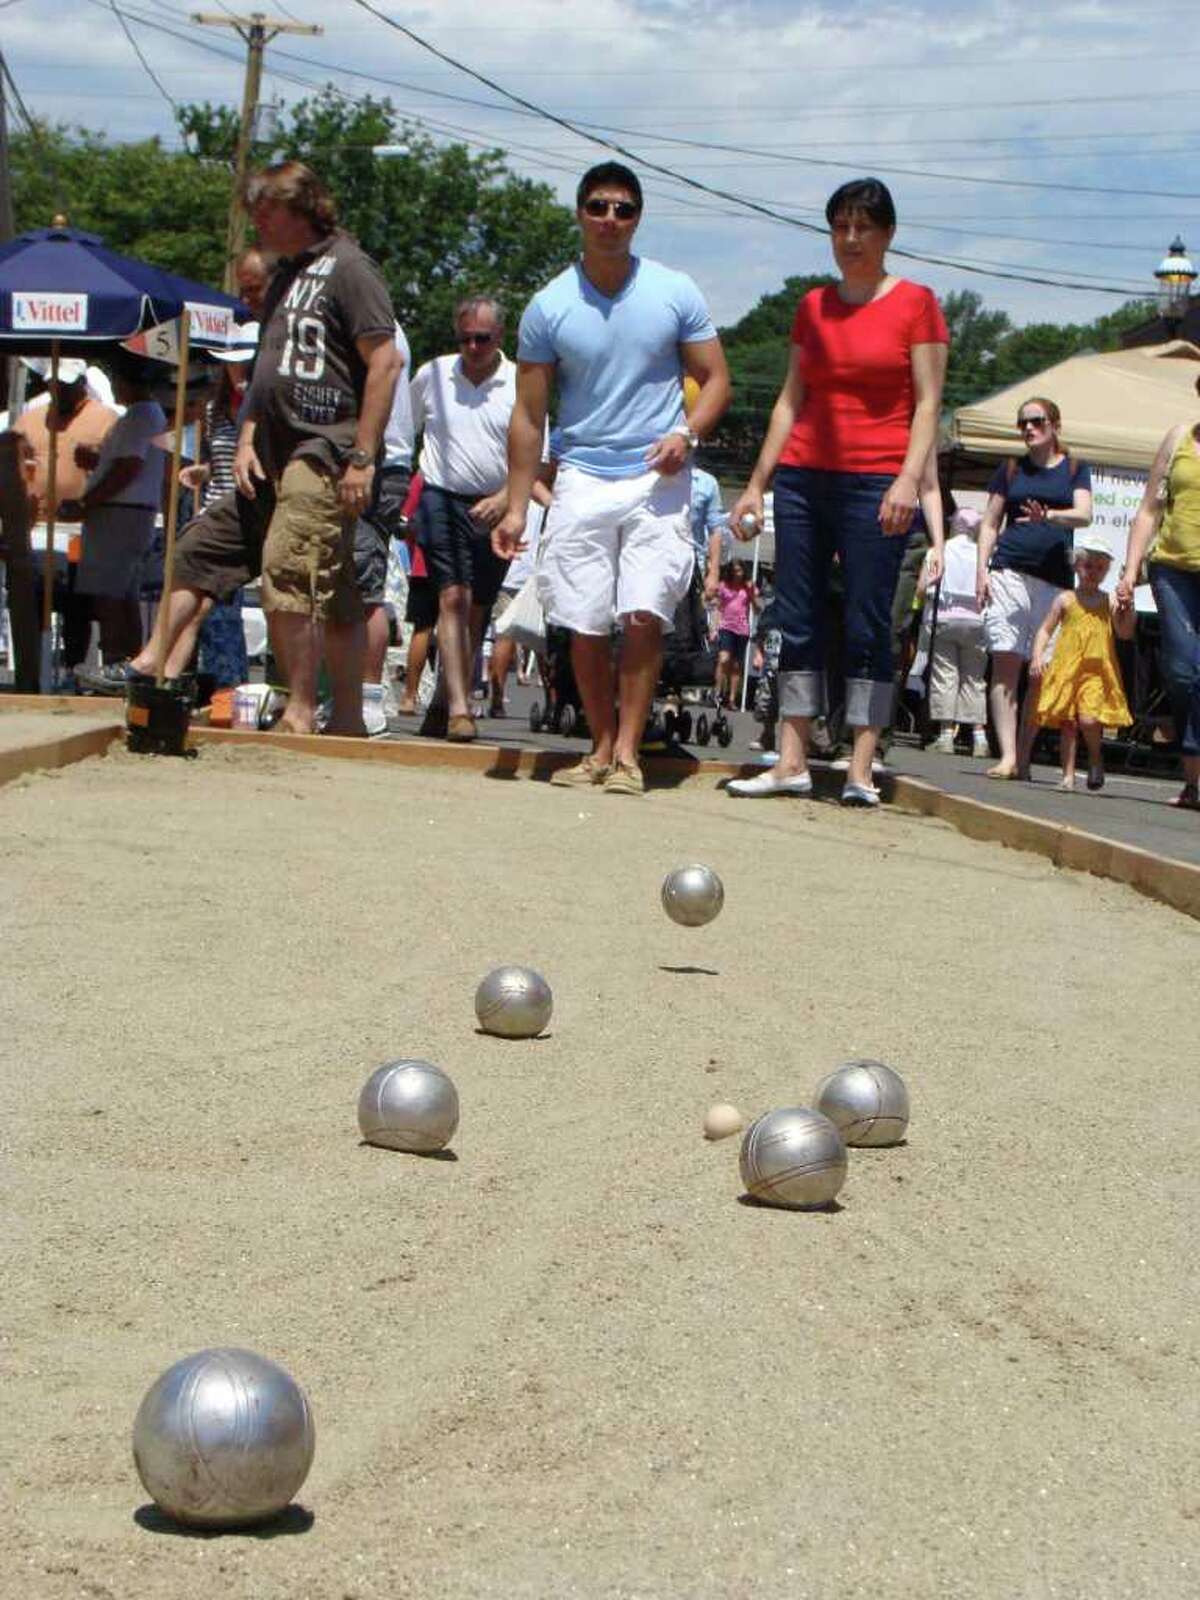 Mike Colonnese of Fairfield participated in the pétanque tournament Sunday during the 12th annual Bastille Day street fair downtown on Sanford Street.